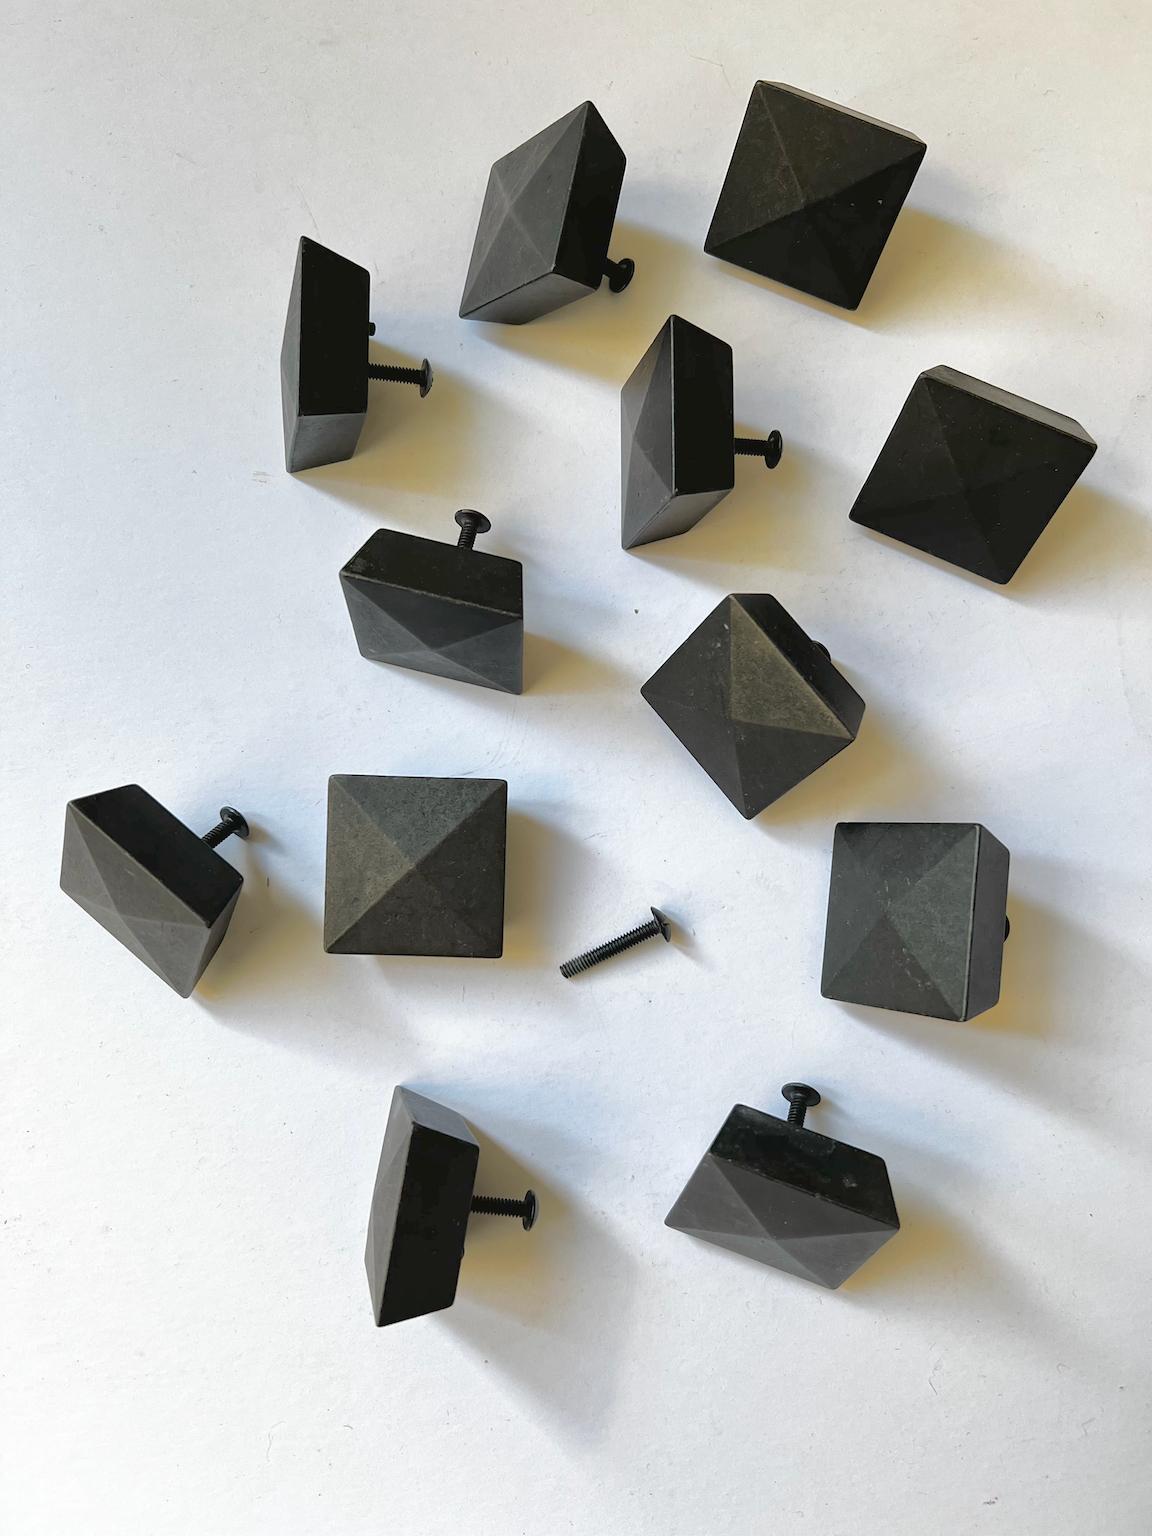 A group of 12 vintage square furniture handles or knobs, with bolts, nicely shaped with a pyramid face and sloping sides. Second half twentieth century, found in England.

The handles look to be cast and patinated bronze - almost black - with an